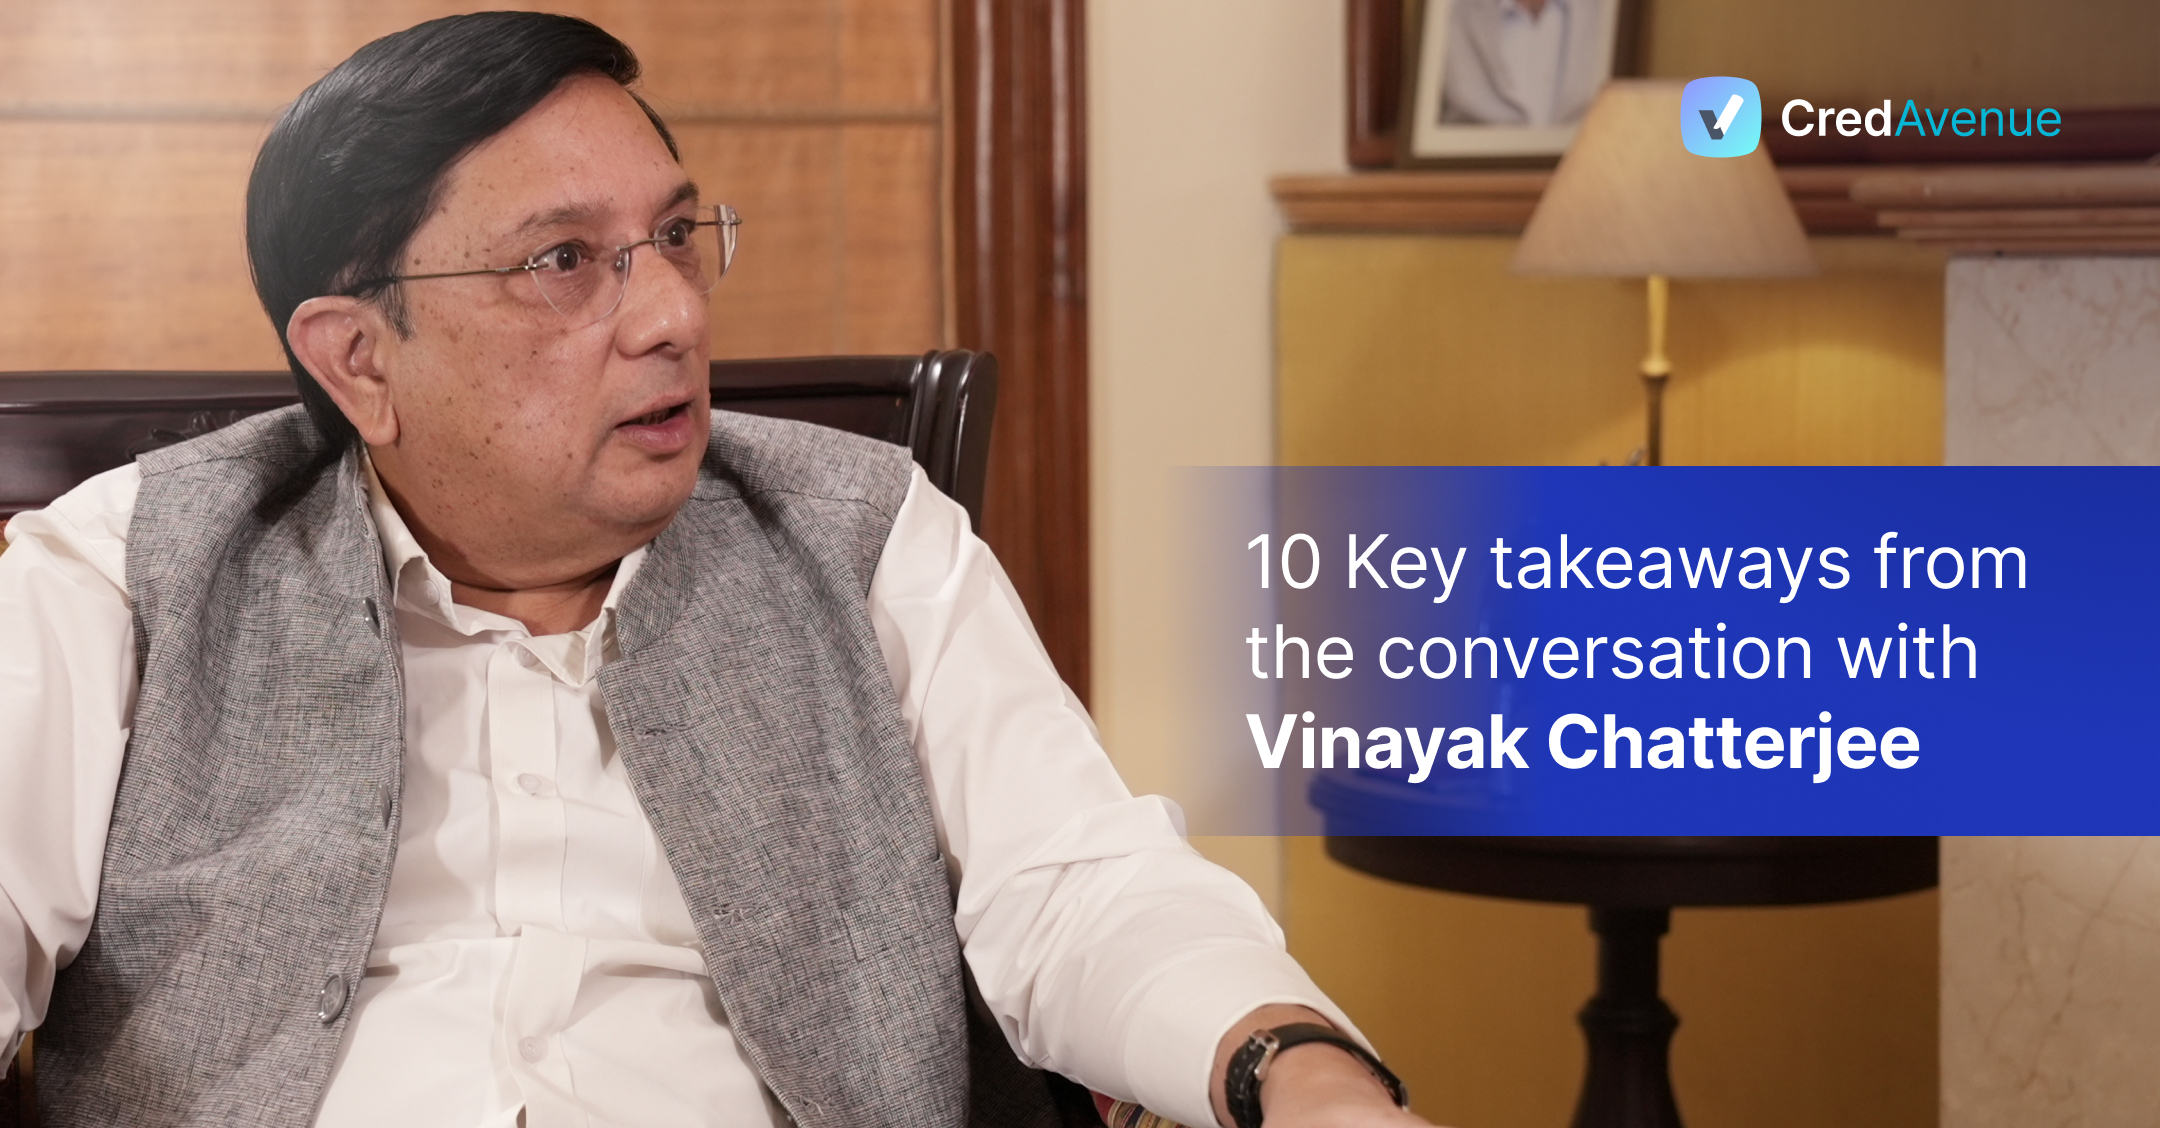 Infrastructure financing in Ind10-key-takeaways-from-the-conversation-with-Vinayak-Chatterjee